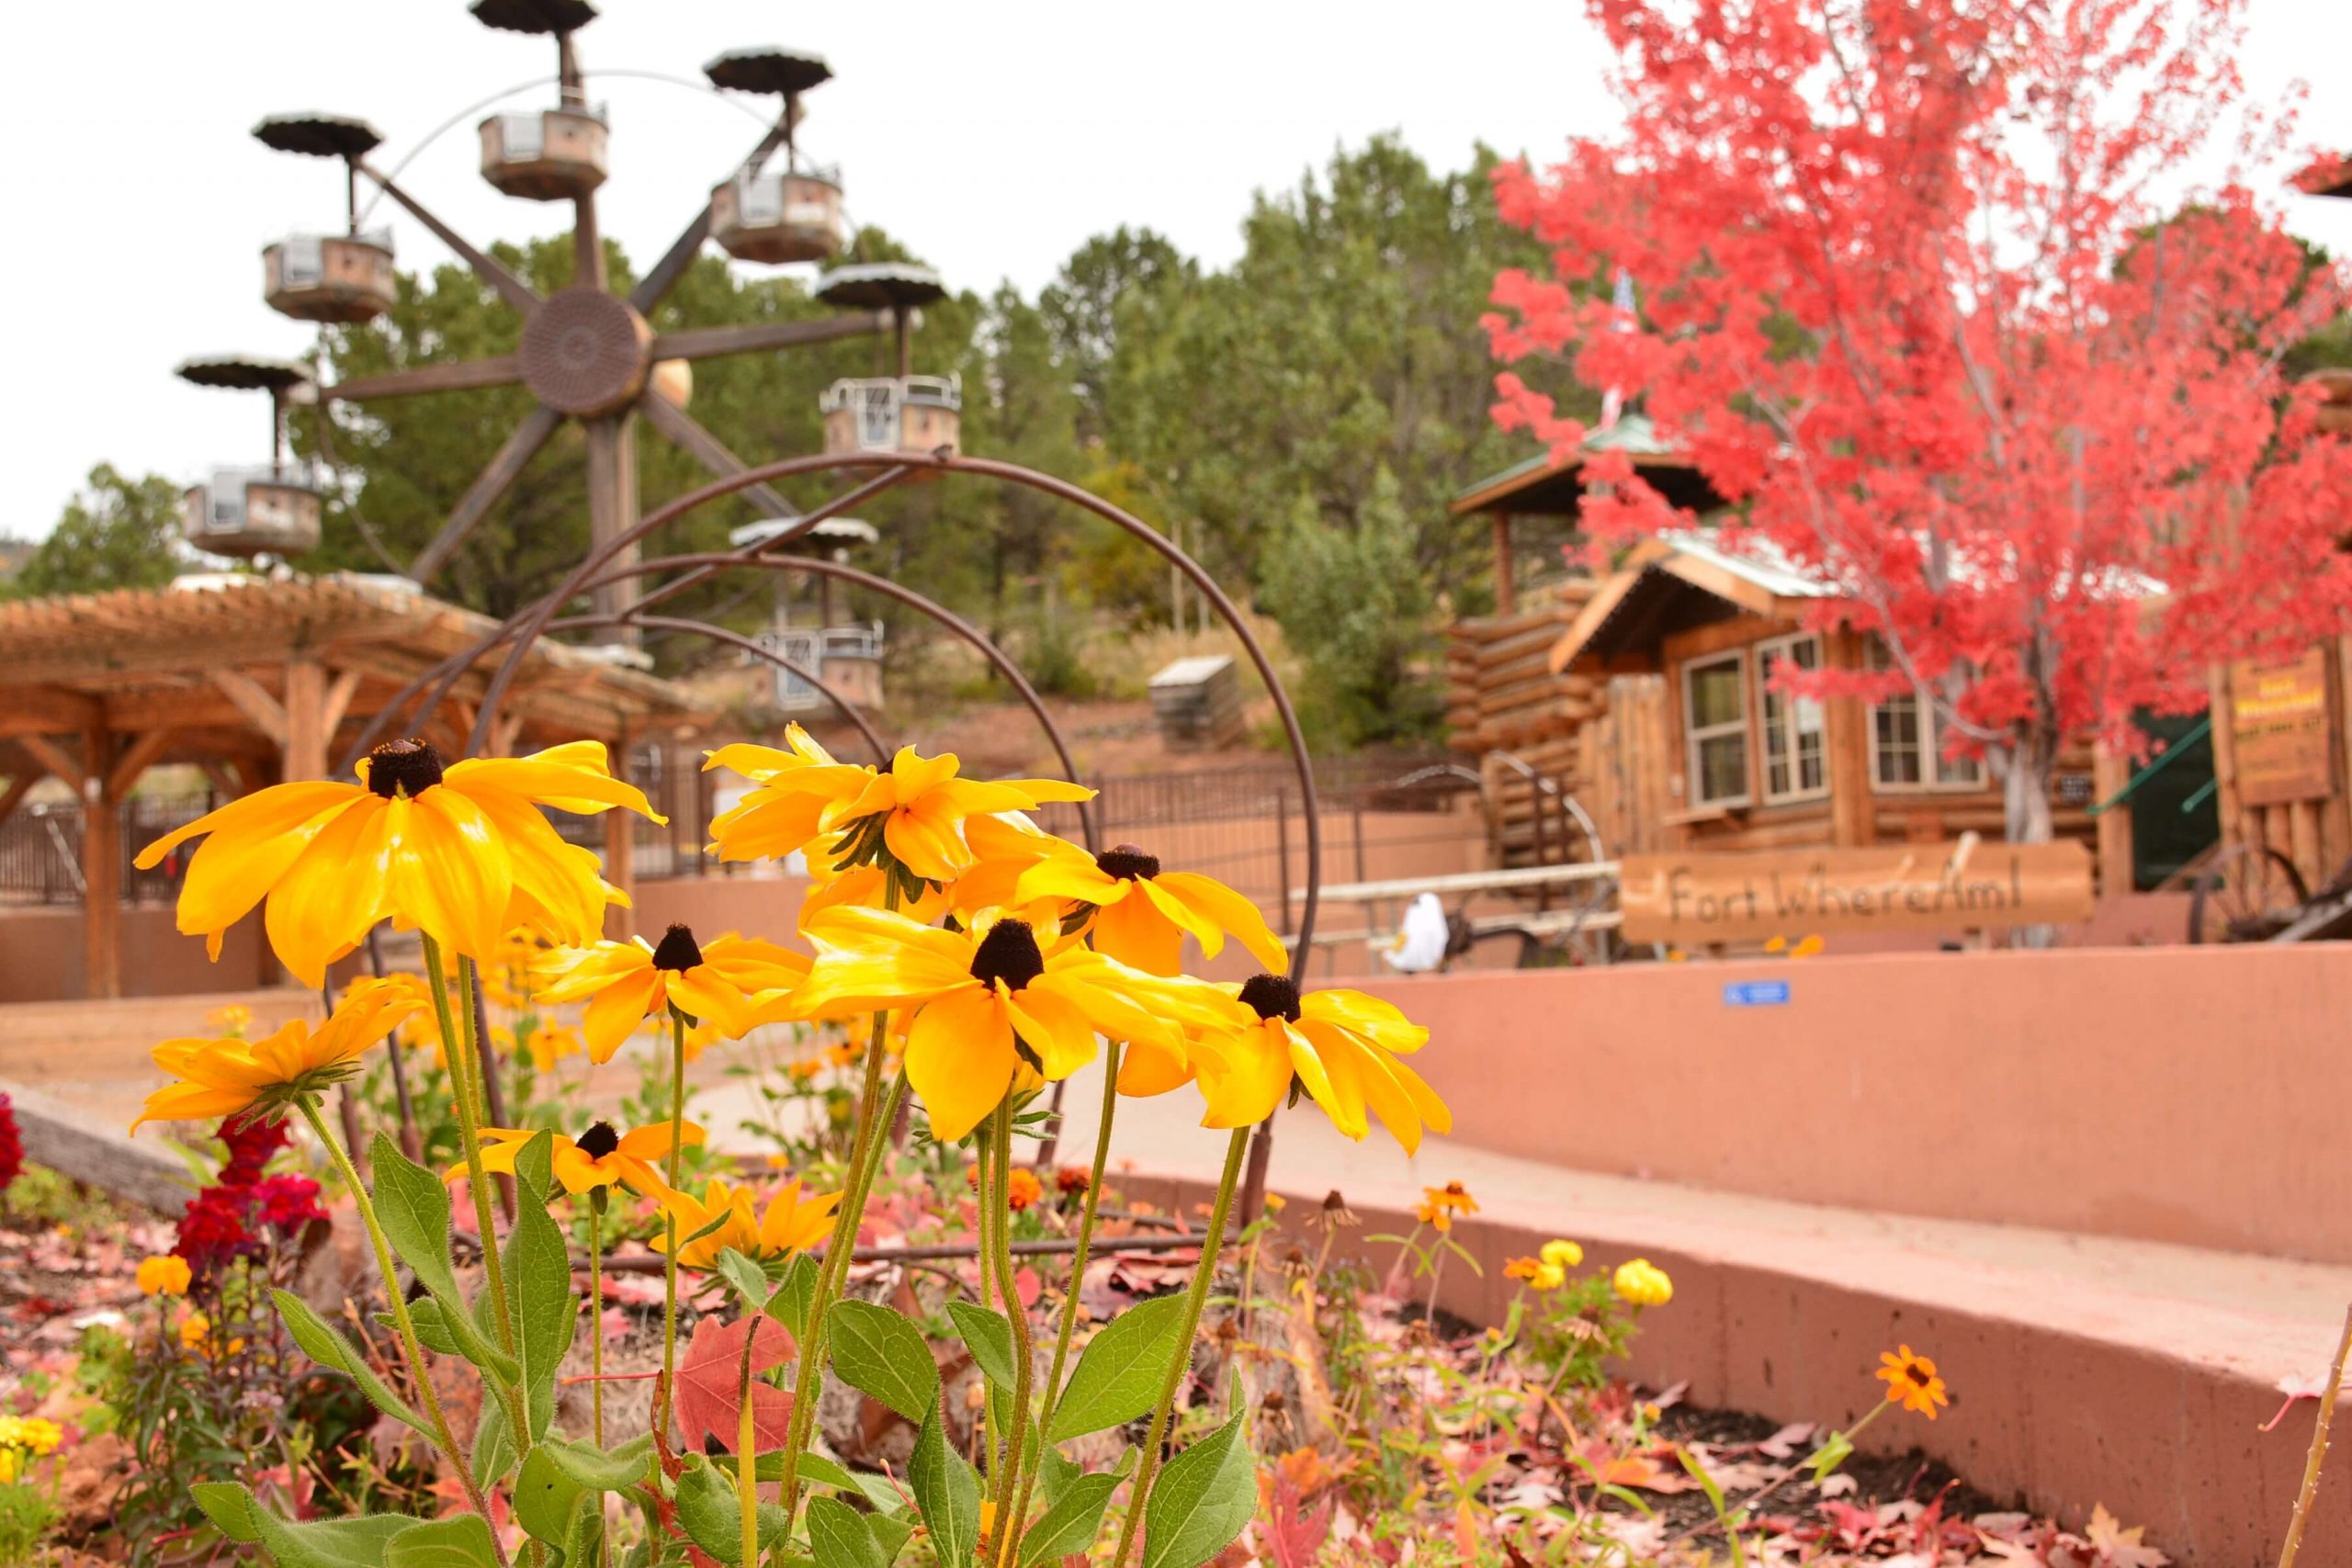 Fall is a beautiful time of year to visit Glenwood Caverns Adventure Park